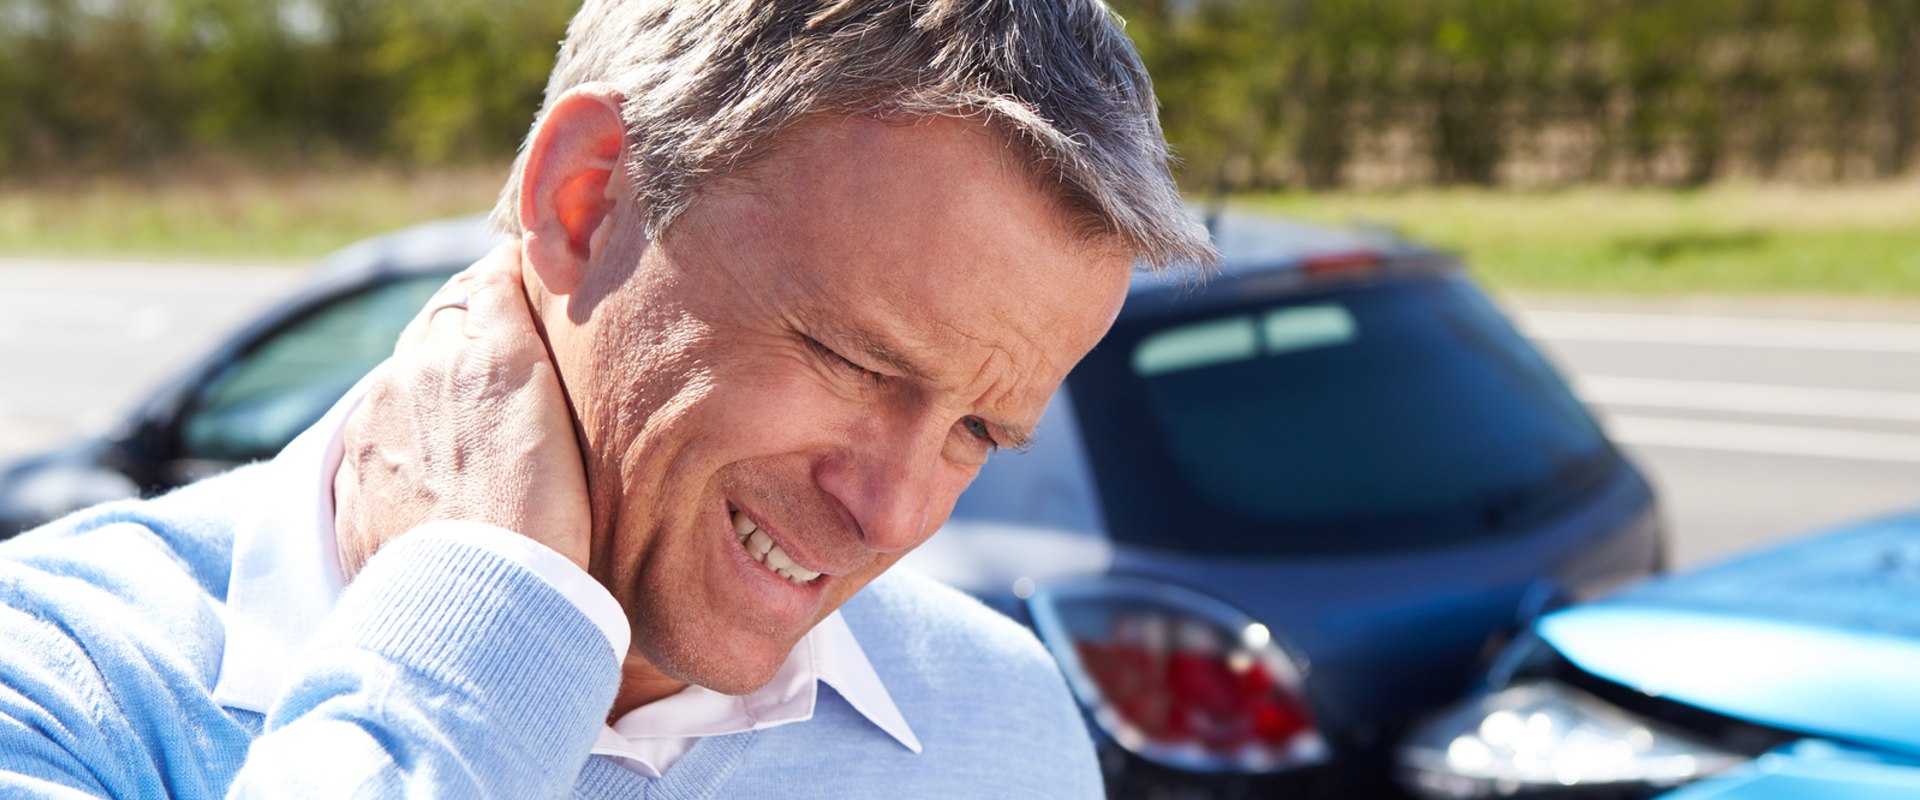 Emergency Auto Accident Injury Chiropractic Treatments: Types and Benefits